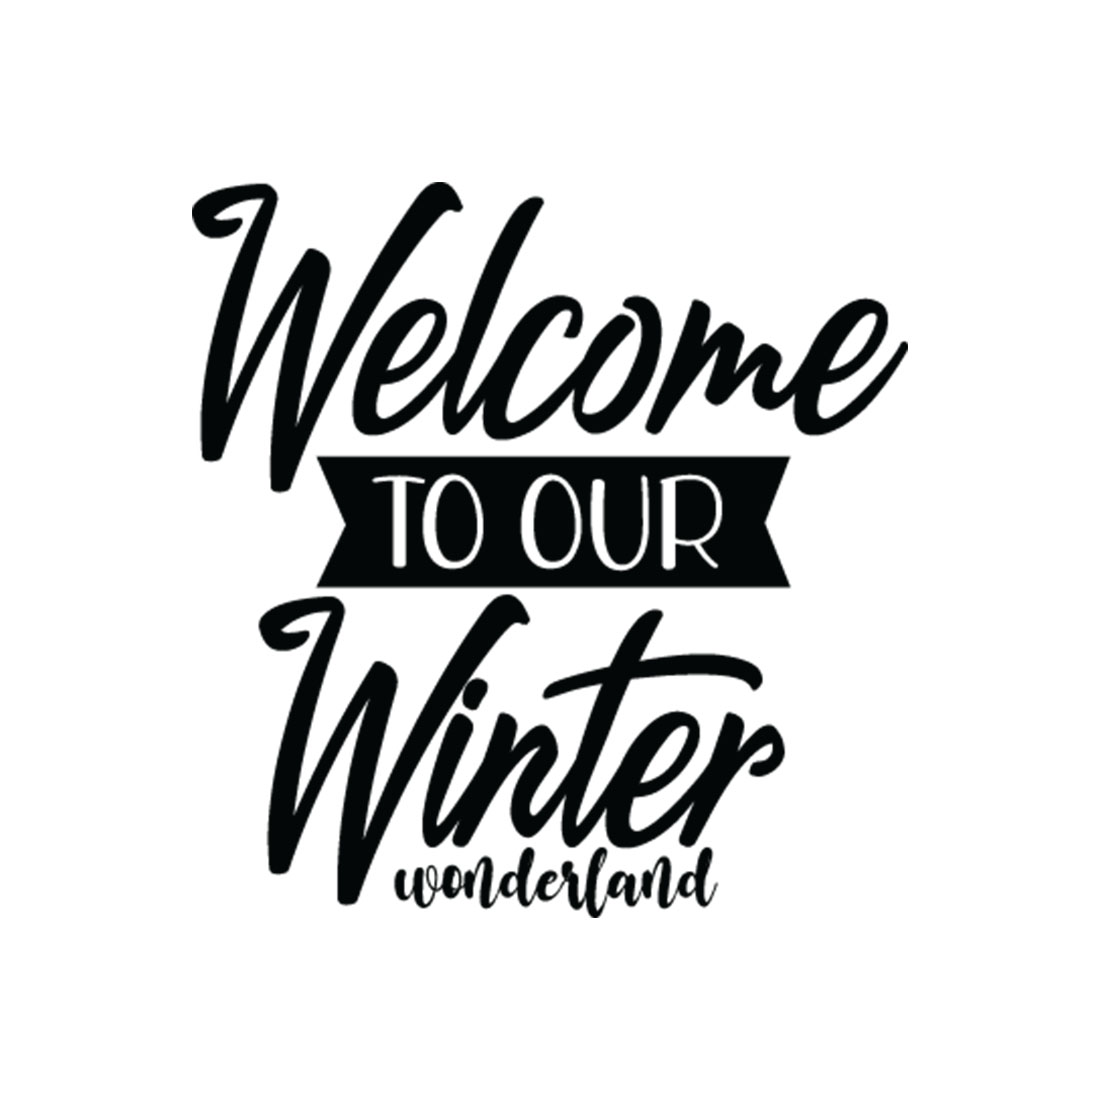 Welcome To Our Winter Wonderland SVG